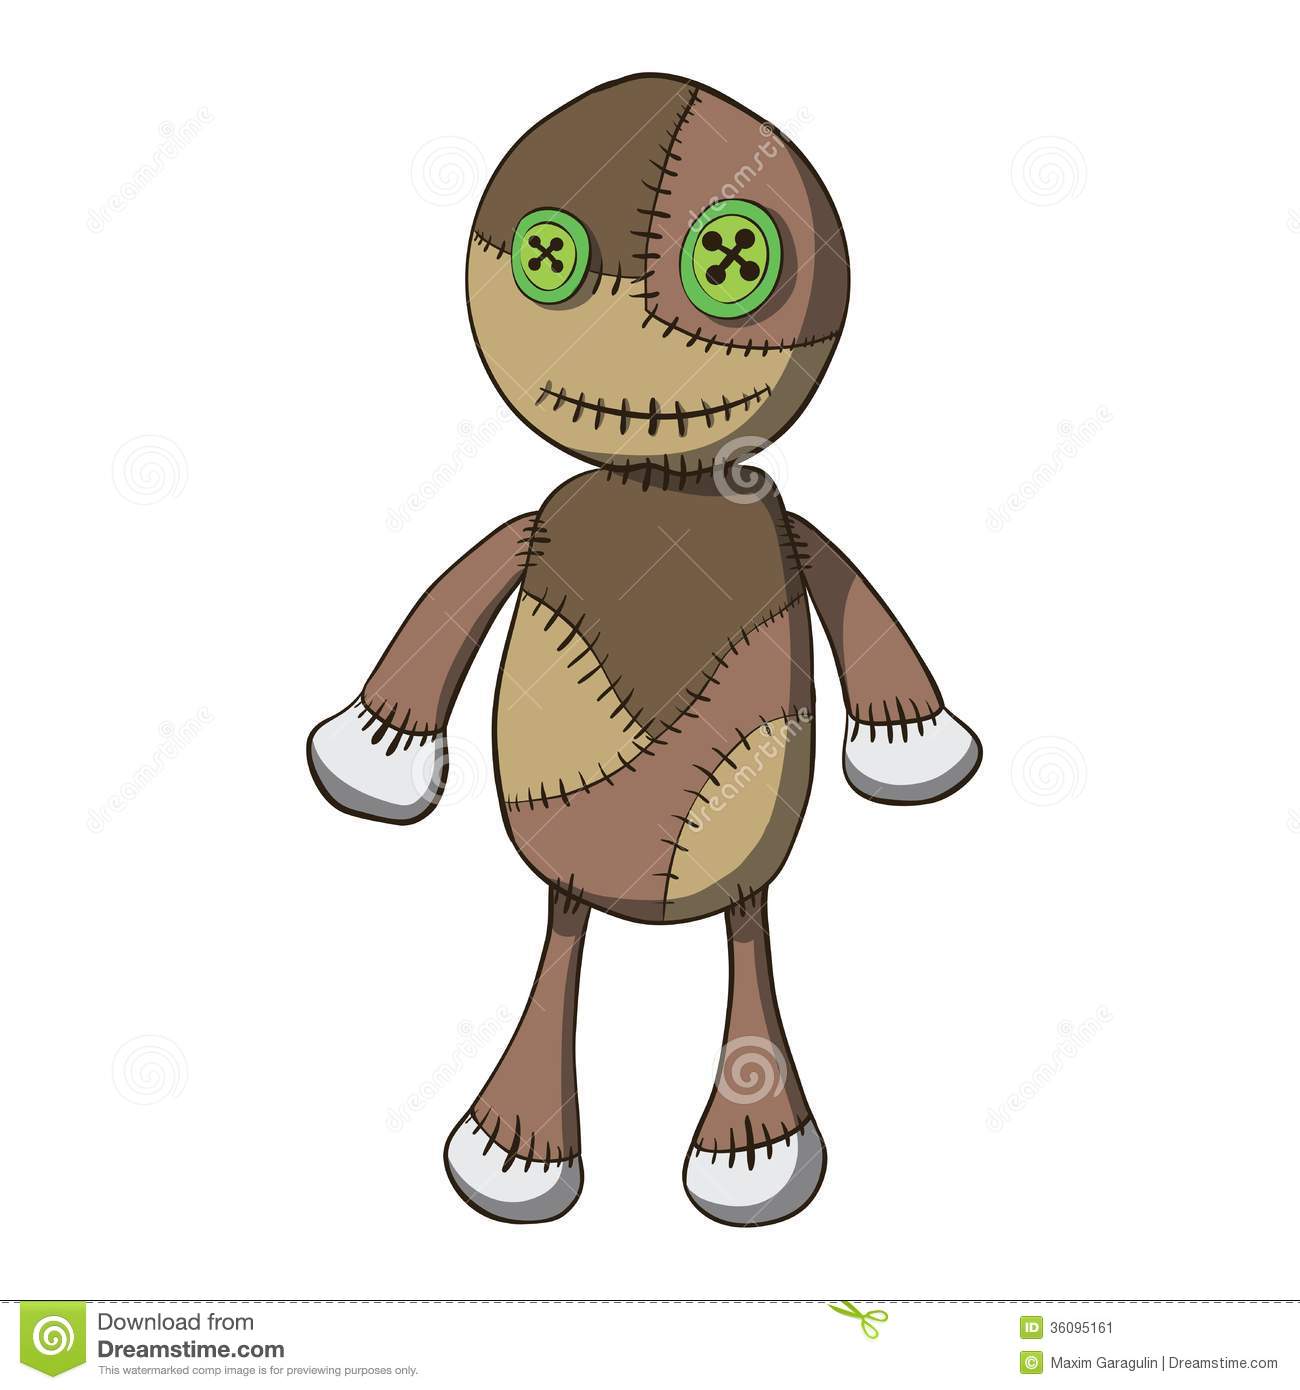 Cartoon Old Rag Doll With Buttons  Vector Illustration  This Is File